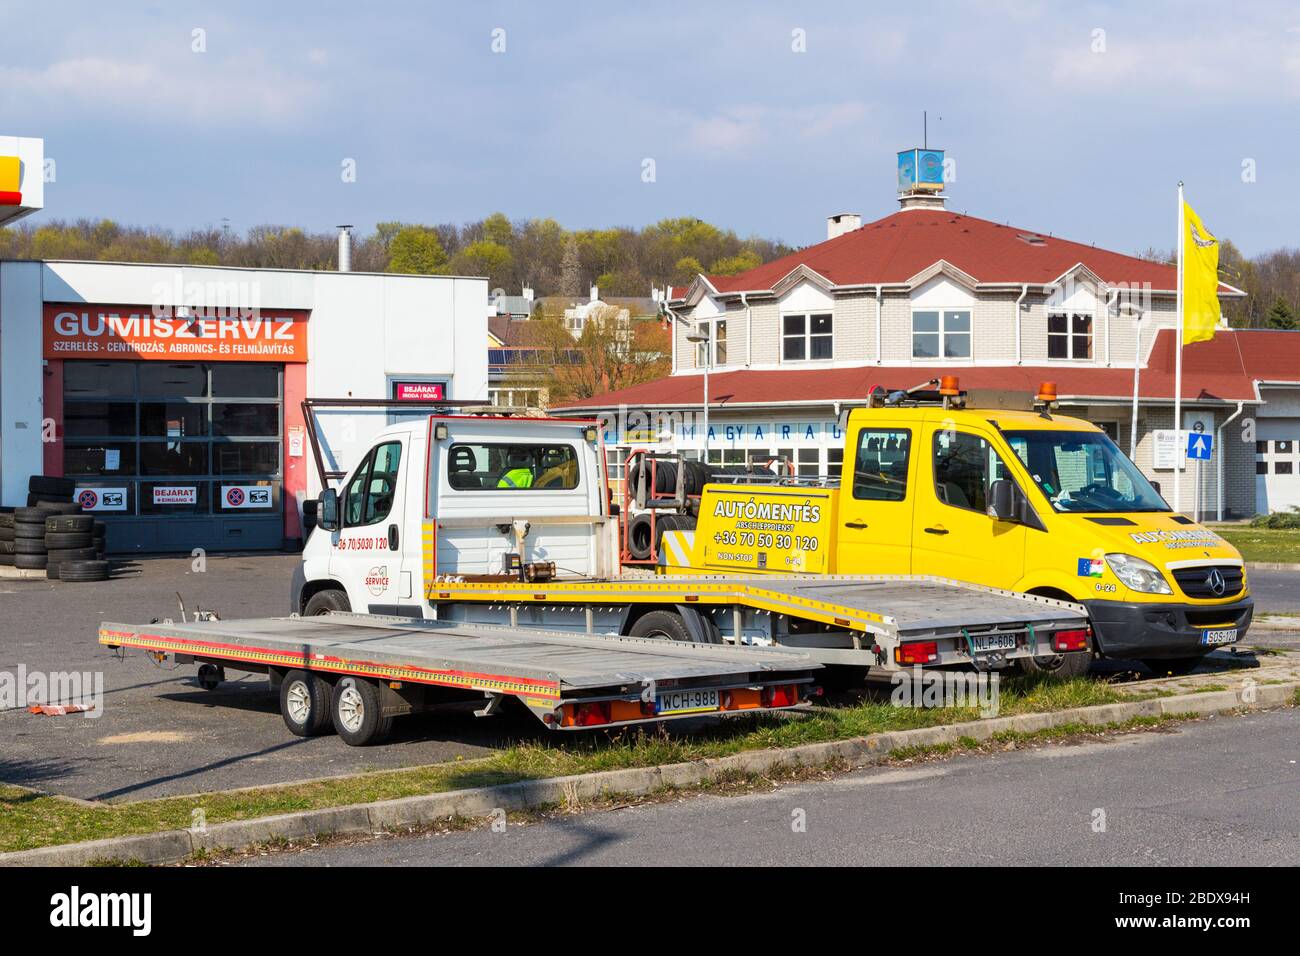 Tow truck trucks and trailer parked near tire tyre service (gumiszerviz) and Hungarian car club (magyar autoklub) building, Sopron, Hungary Stock Photo